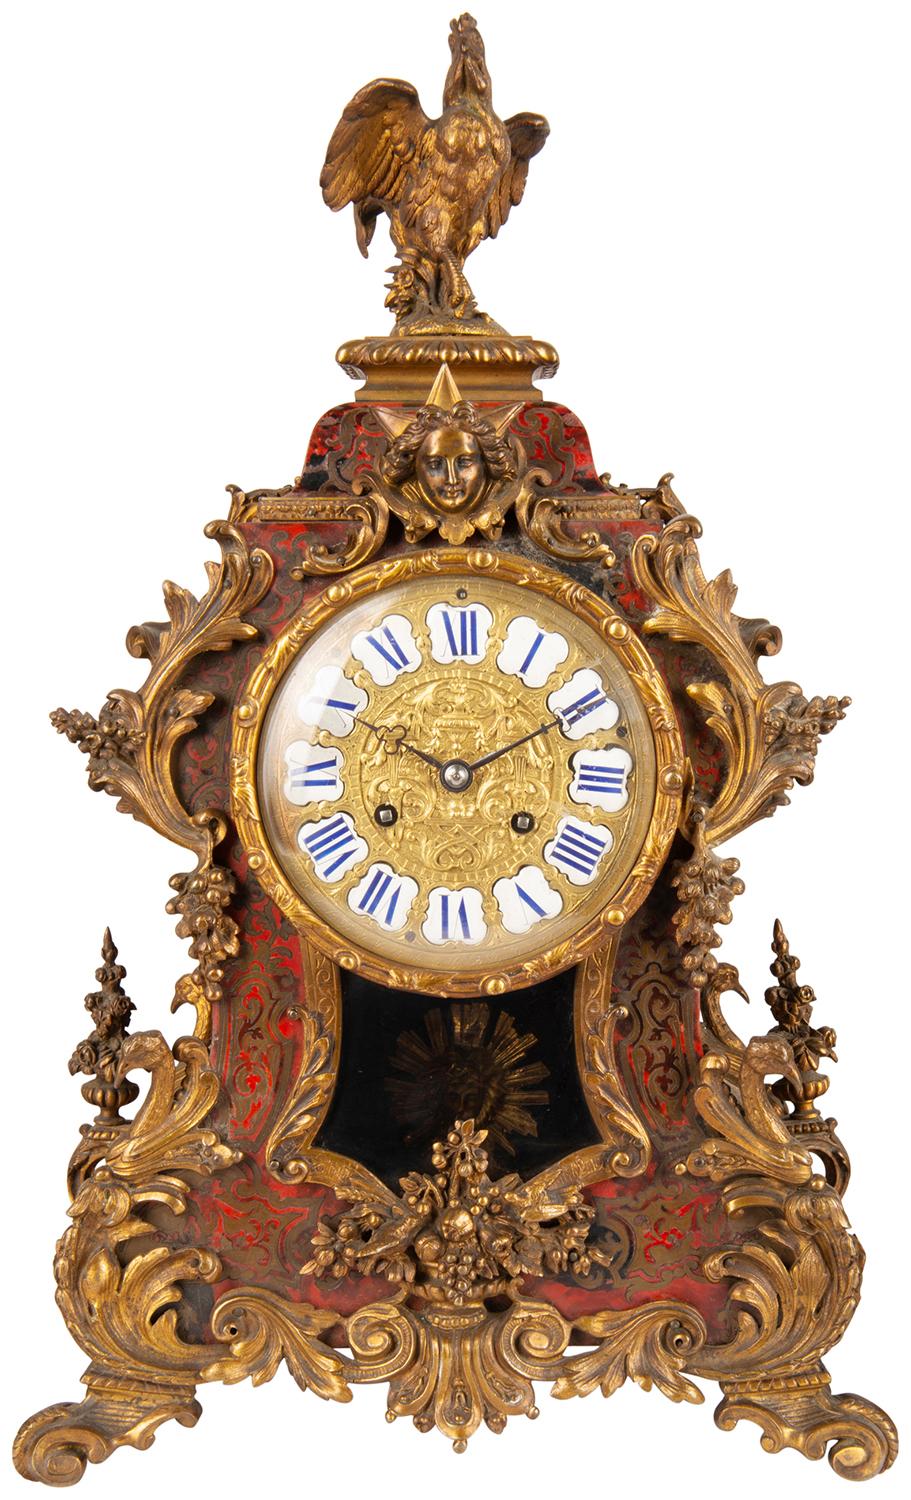 A good quality late 19th century French tortoiseshell and brass inlaid Boulle clock garniture. Having an ormolu cockerel finial above the clock face with enamel numerals, rococo gilded ormolu mounts, a glazed window displaying the sunburst pendulum.